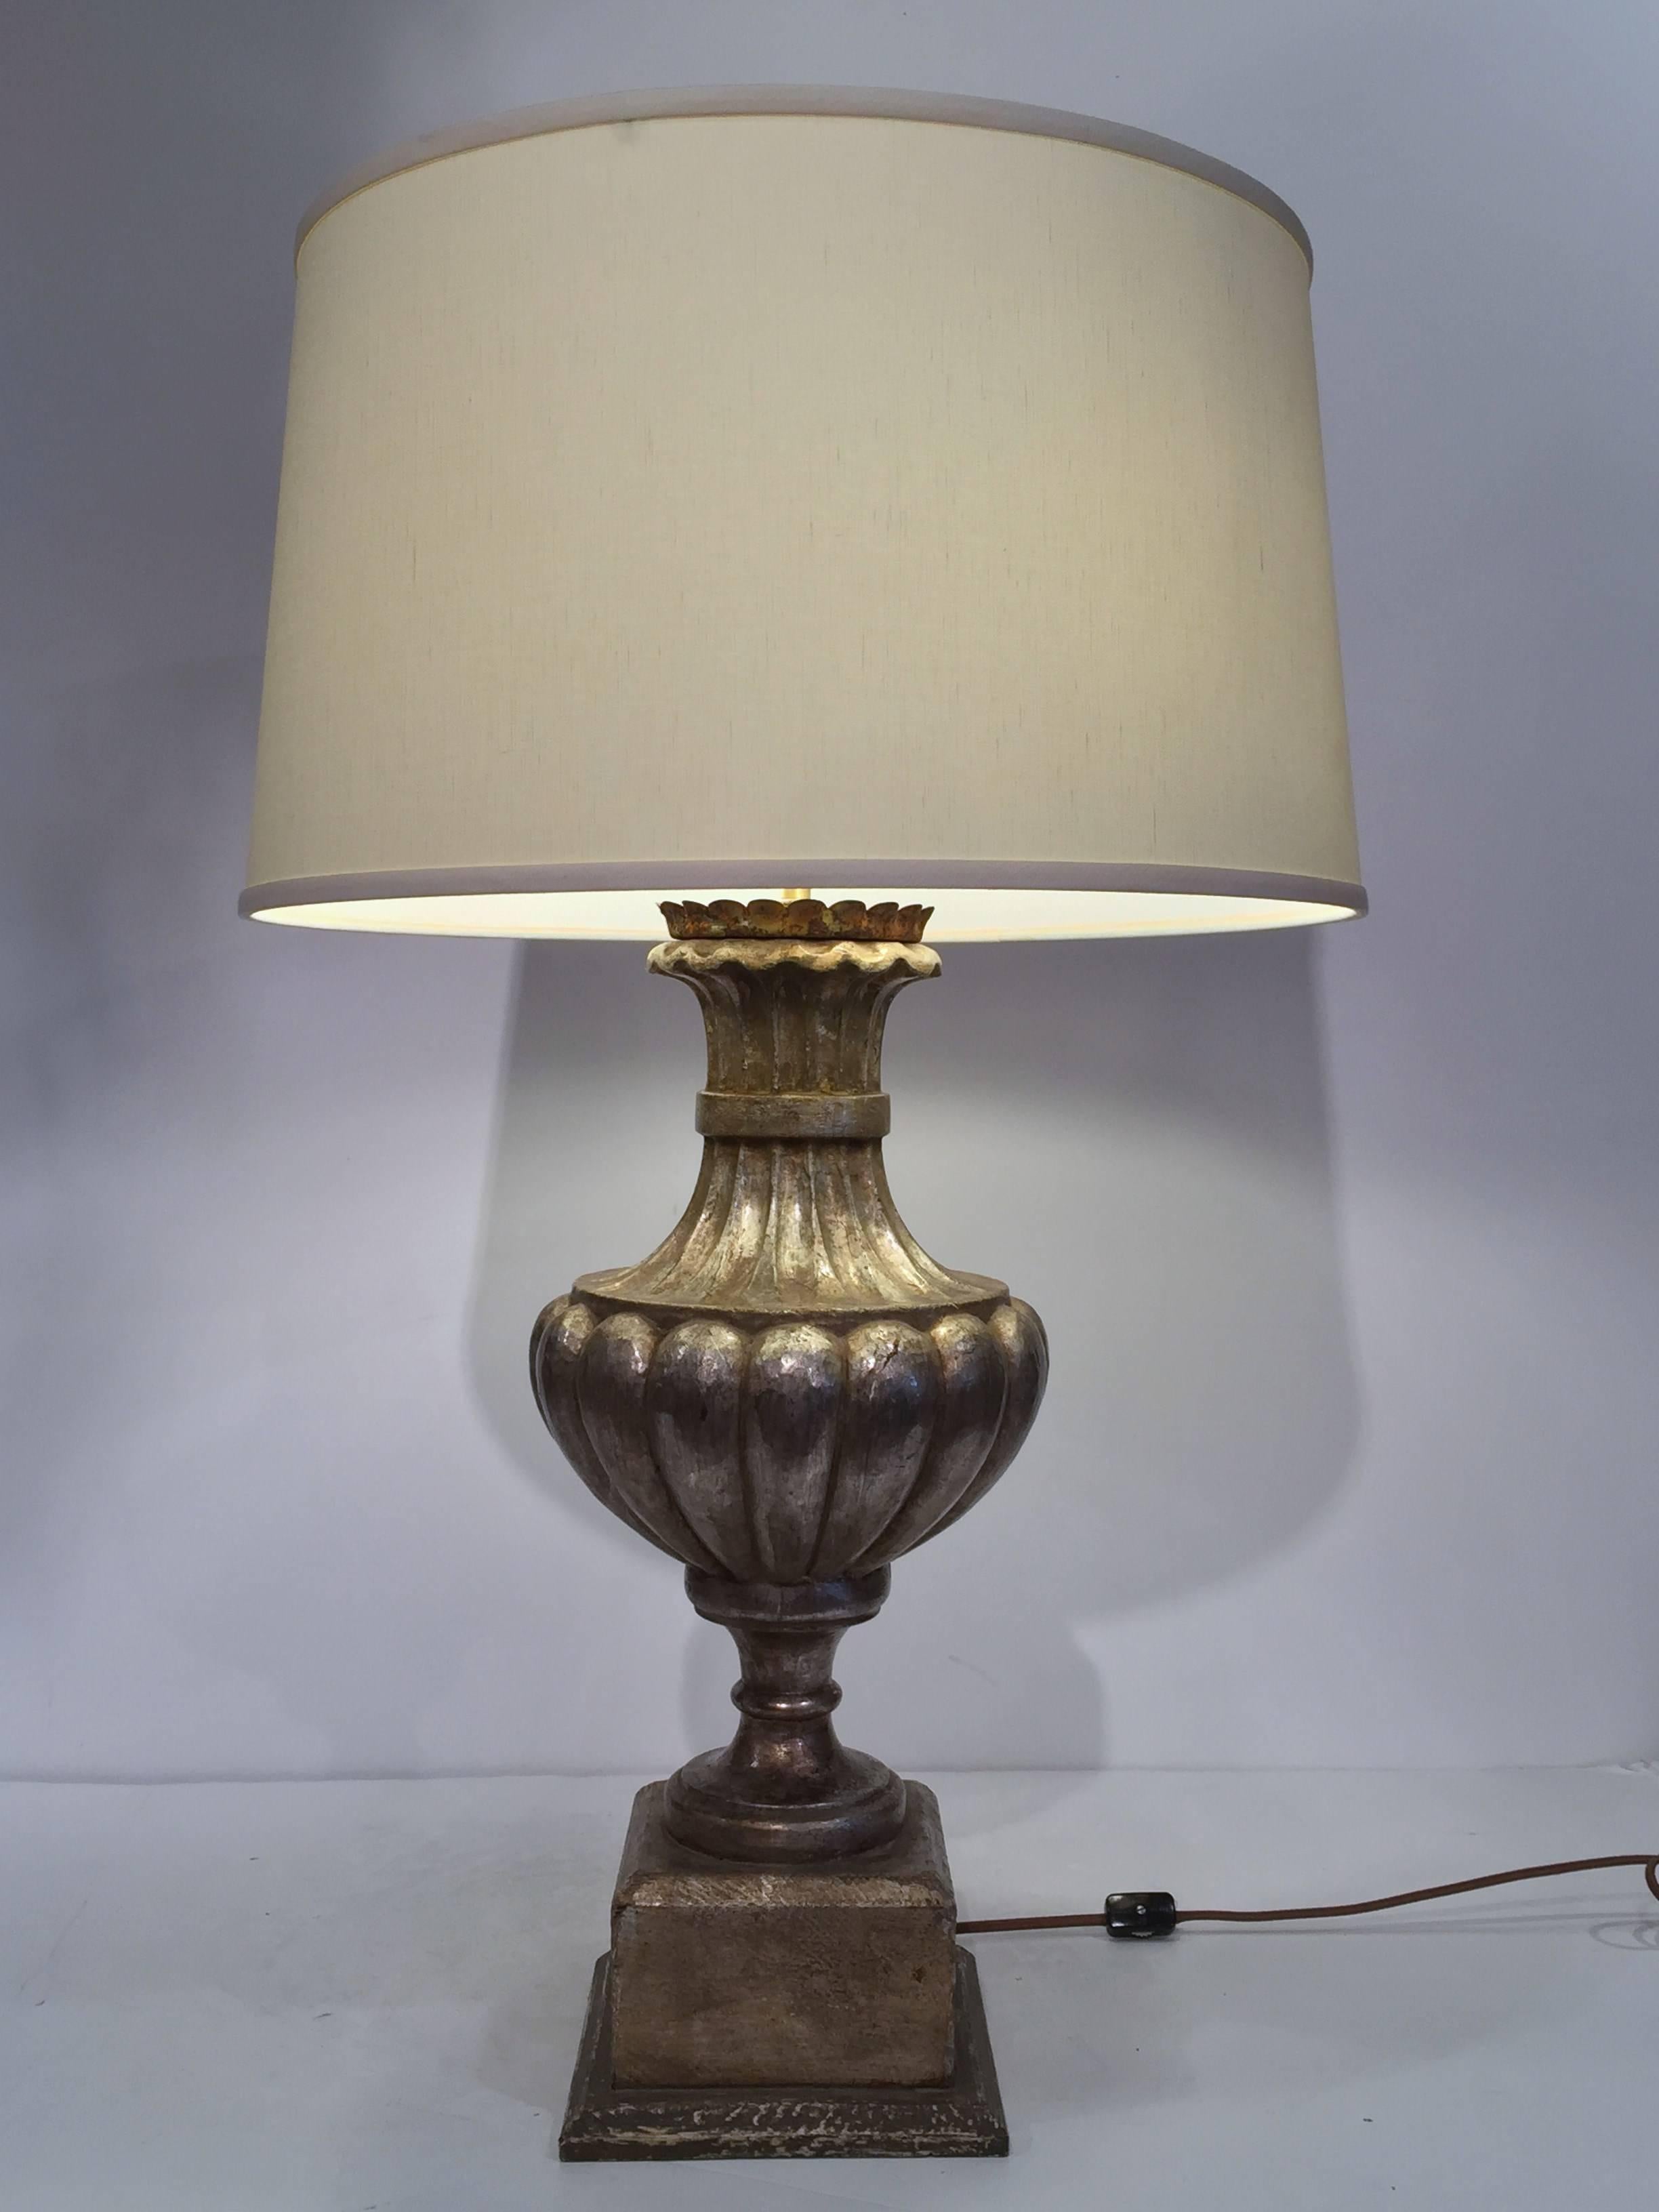 This pair of wooden vase lamp bases were crafted in Italy with metallic silver leaf finish. The bases are carved in the shape of classical urns and have new wiring with double sockets bulbs. Place the lamp bases in a living room or on bedside